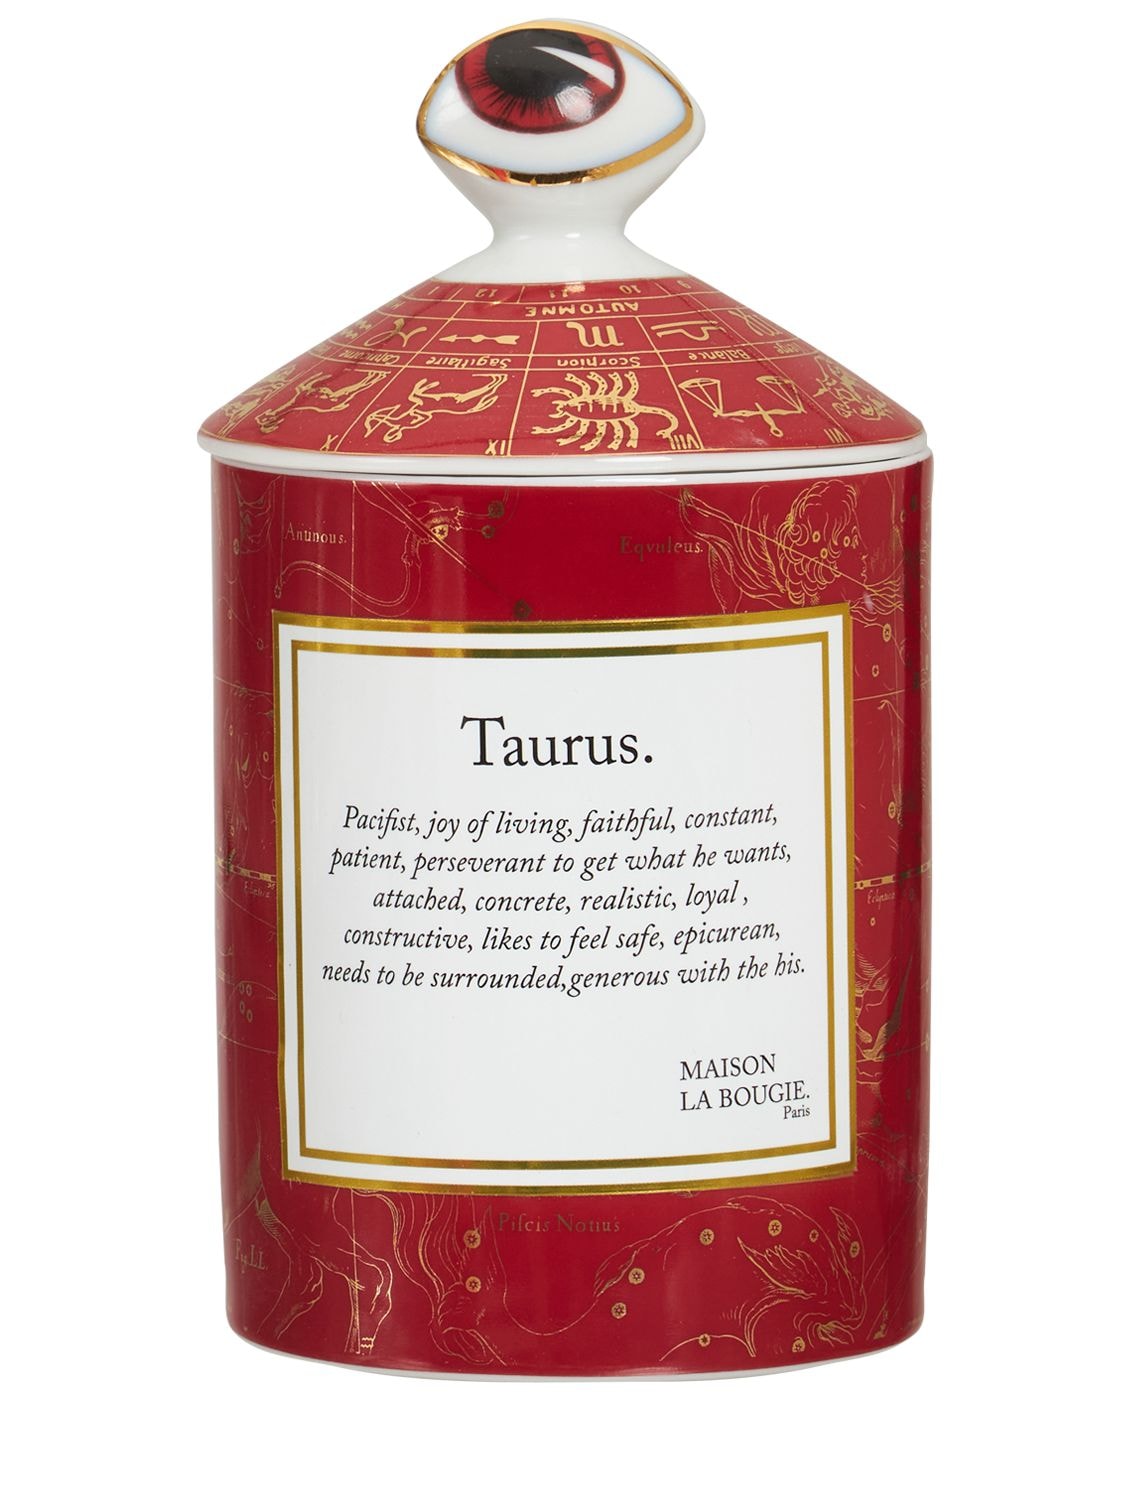 Maison La Bougie 300克taurus Zodiac Scented Candle香氛蜡烛 In Red